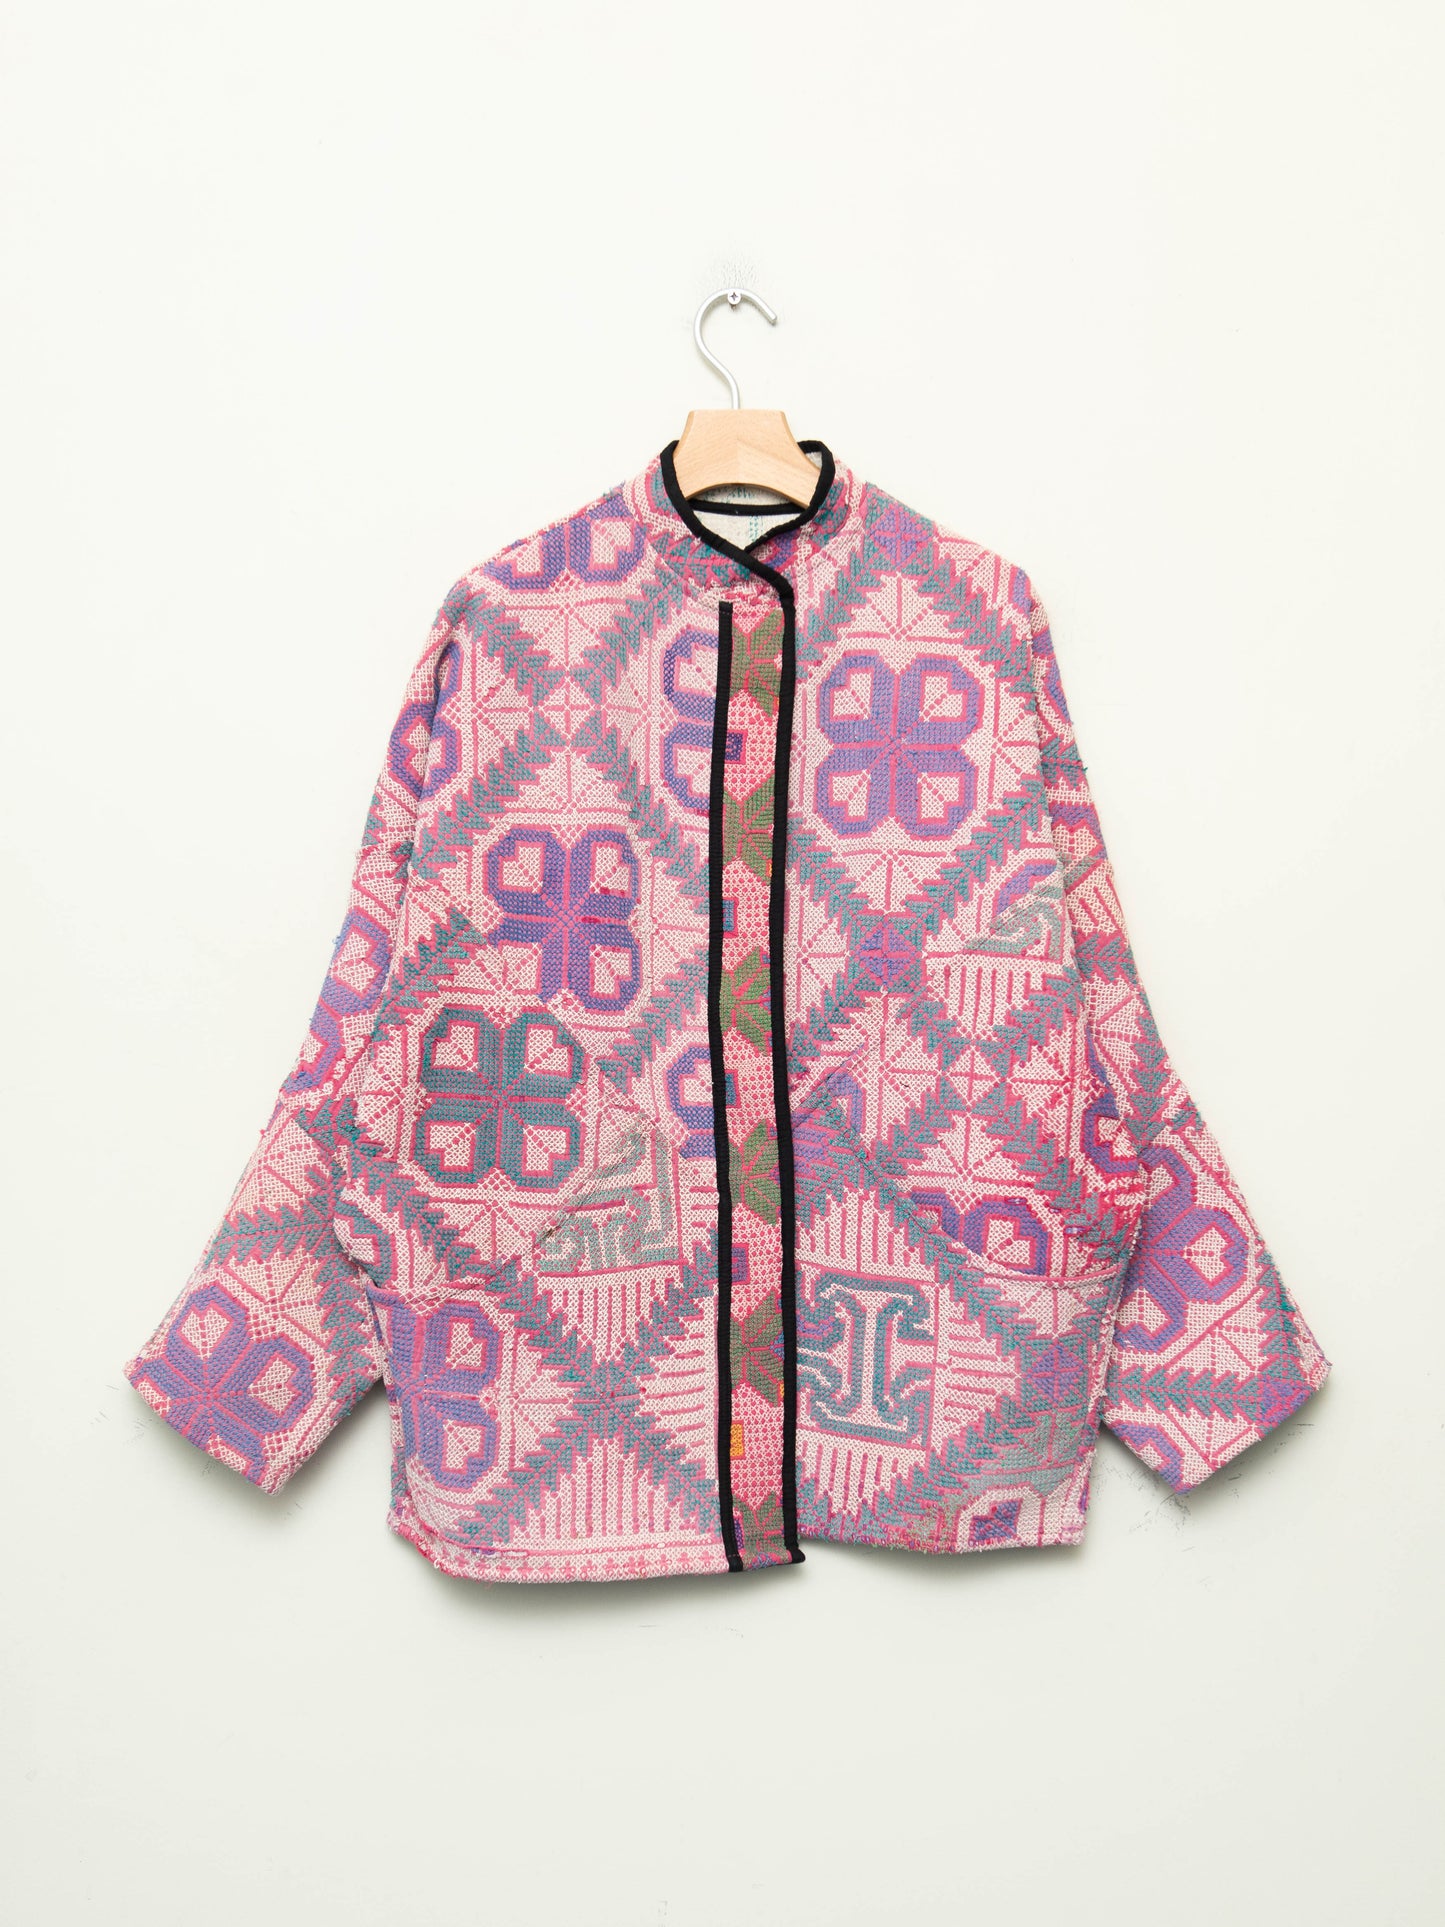 The Ishani Vintage Cross-Stitch Quilted Jacket